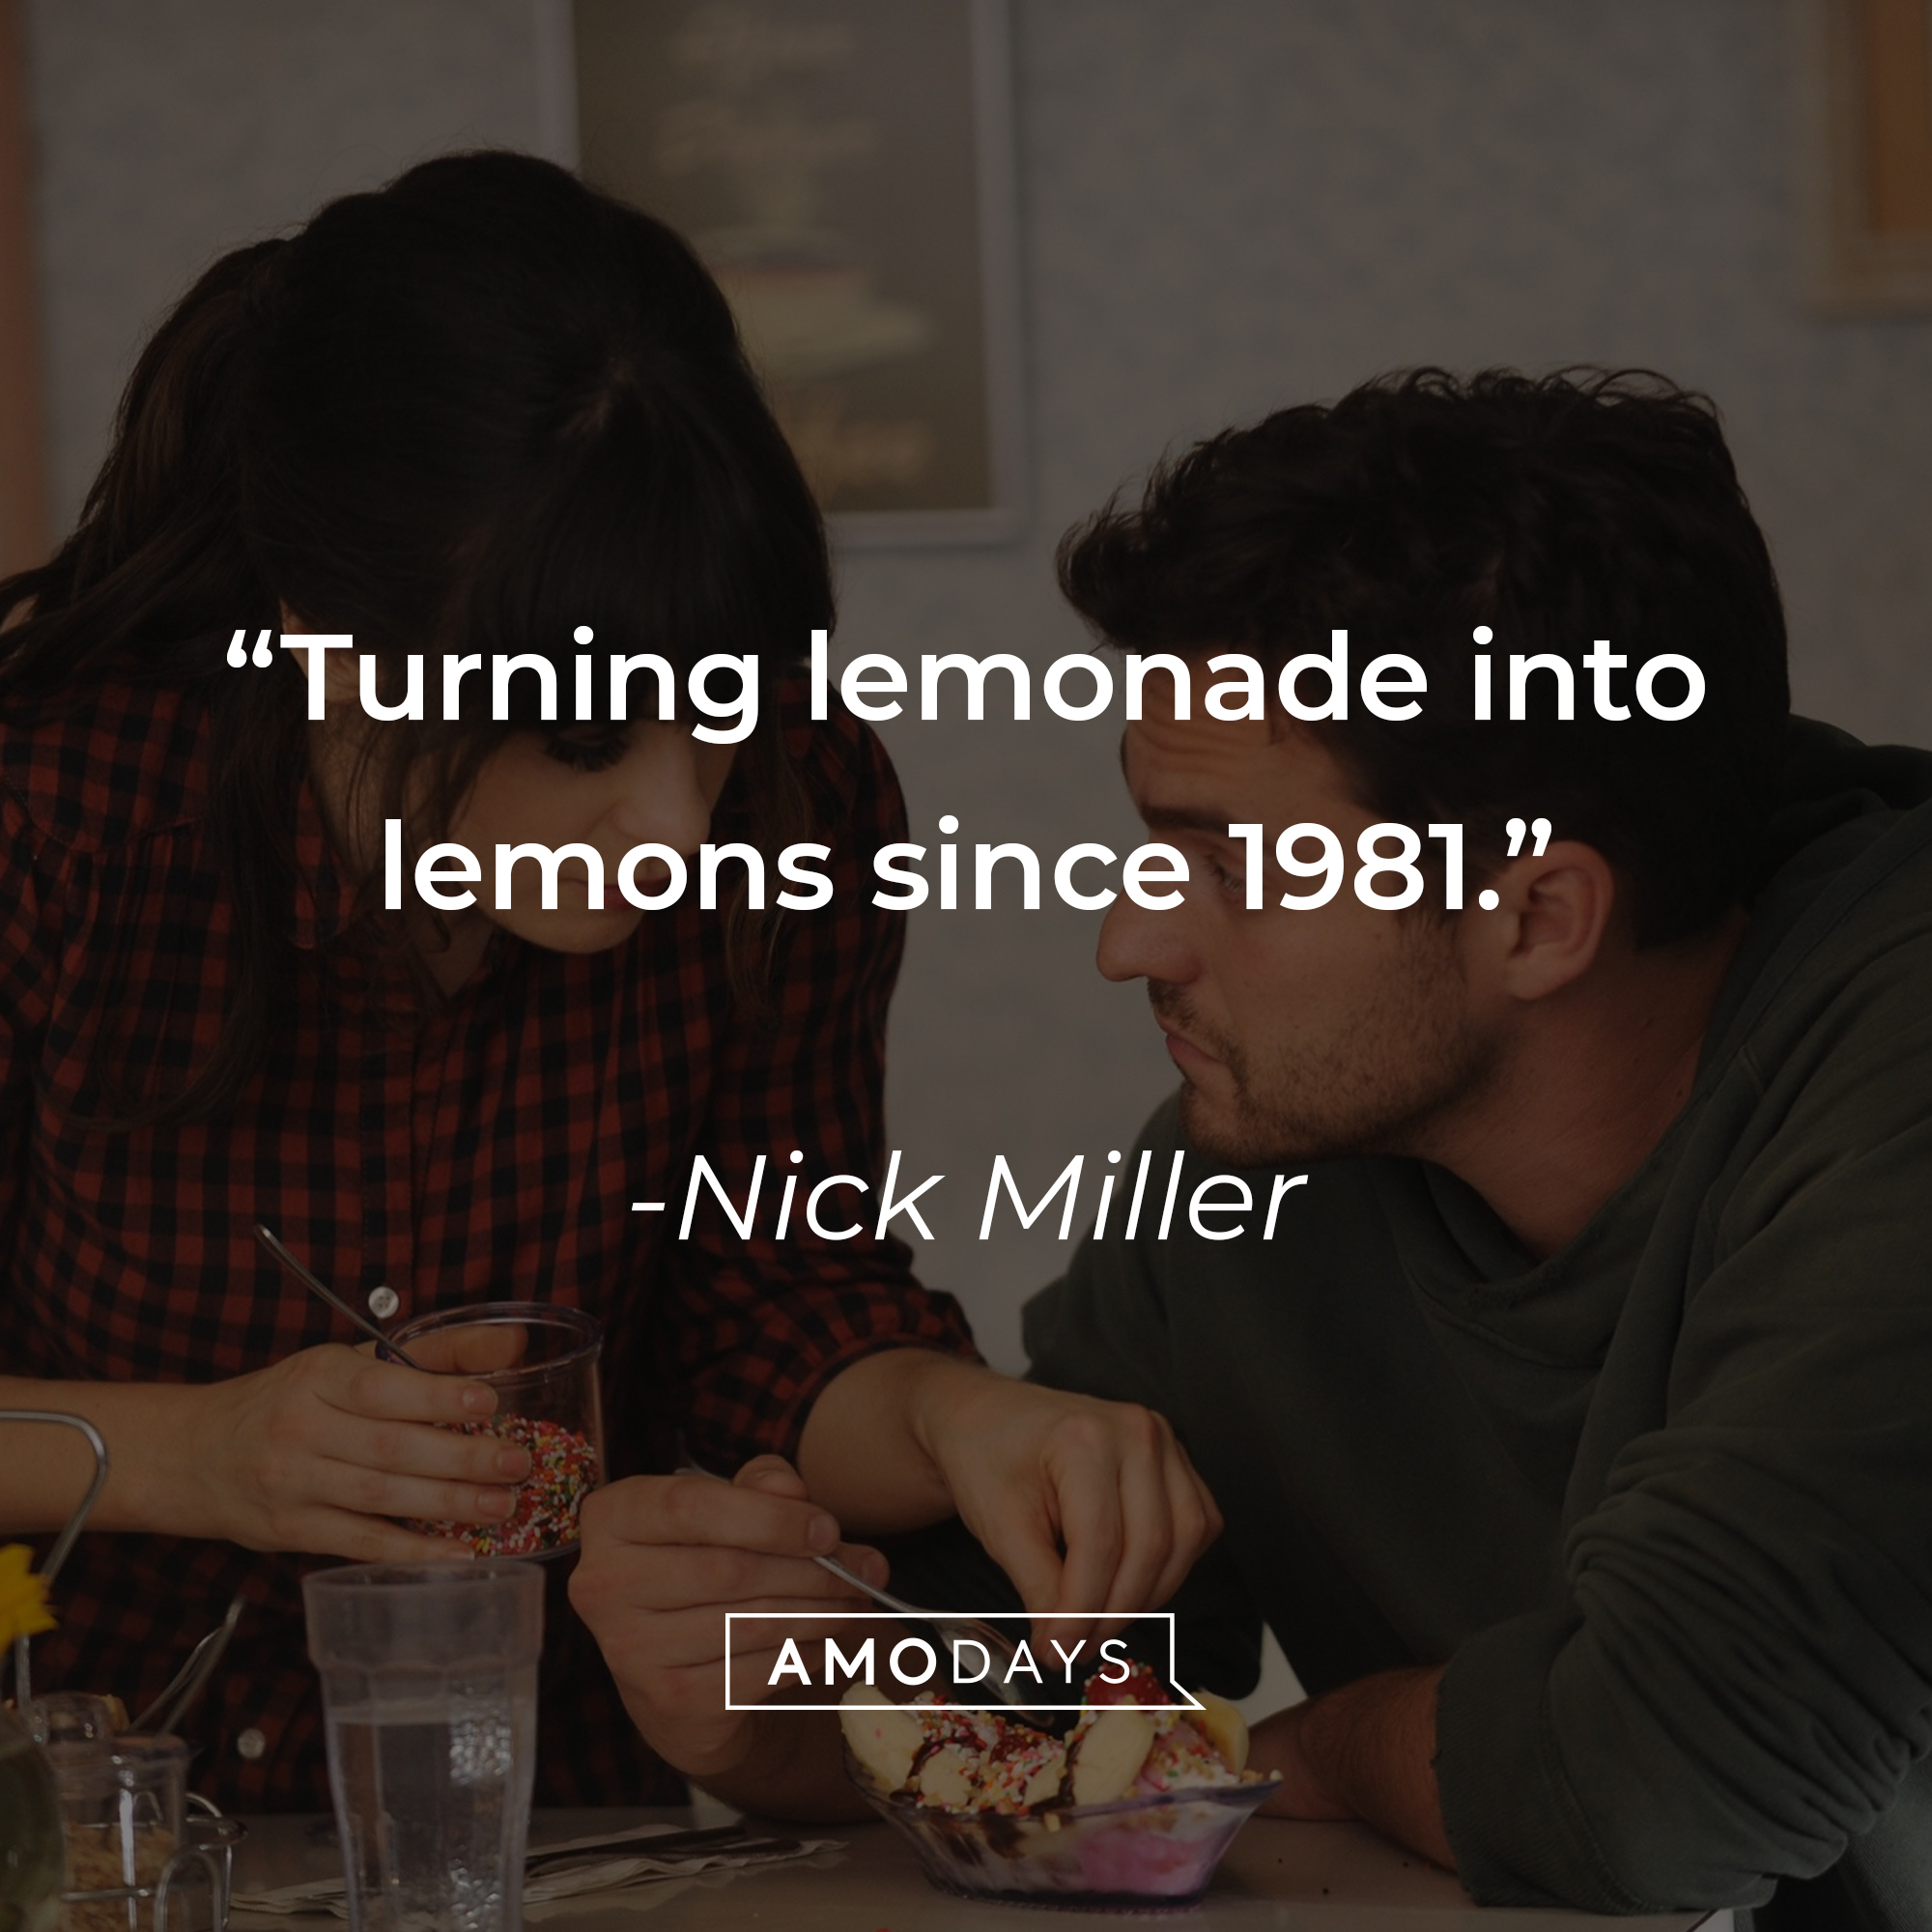 Nick Miller and Jessica Day,  with Miller’s quote: “Turning lemonade into lemons since 1981.”  |  Source: facebook.com/OfficialNewGirl